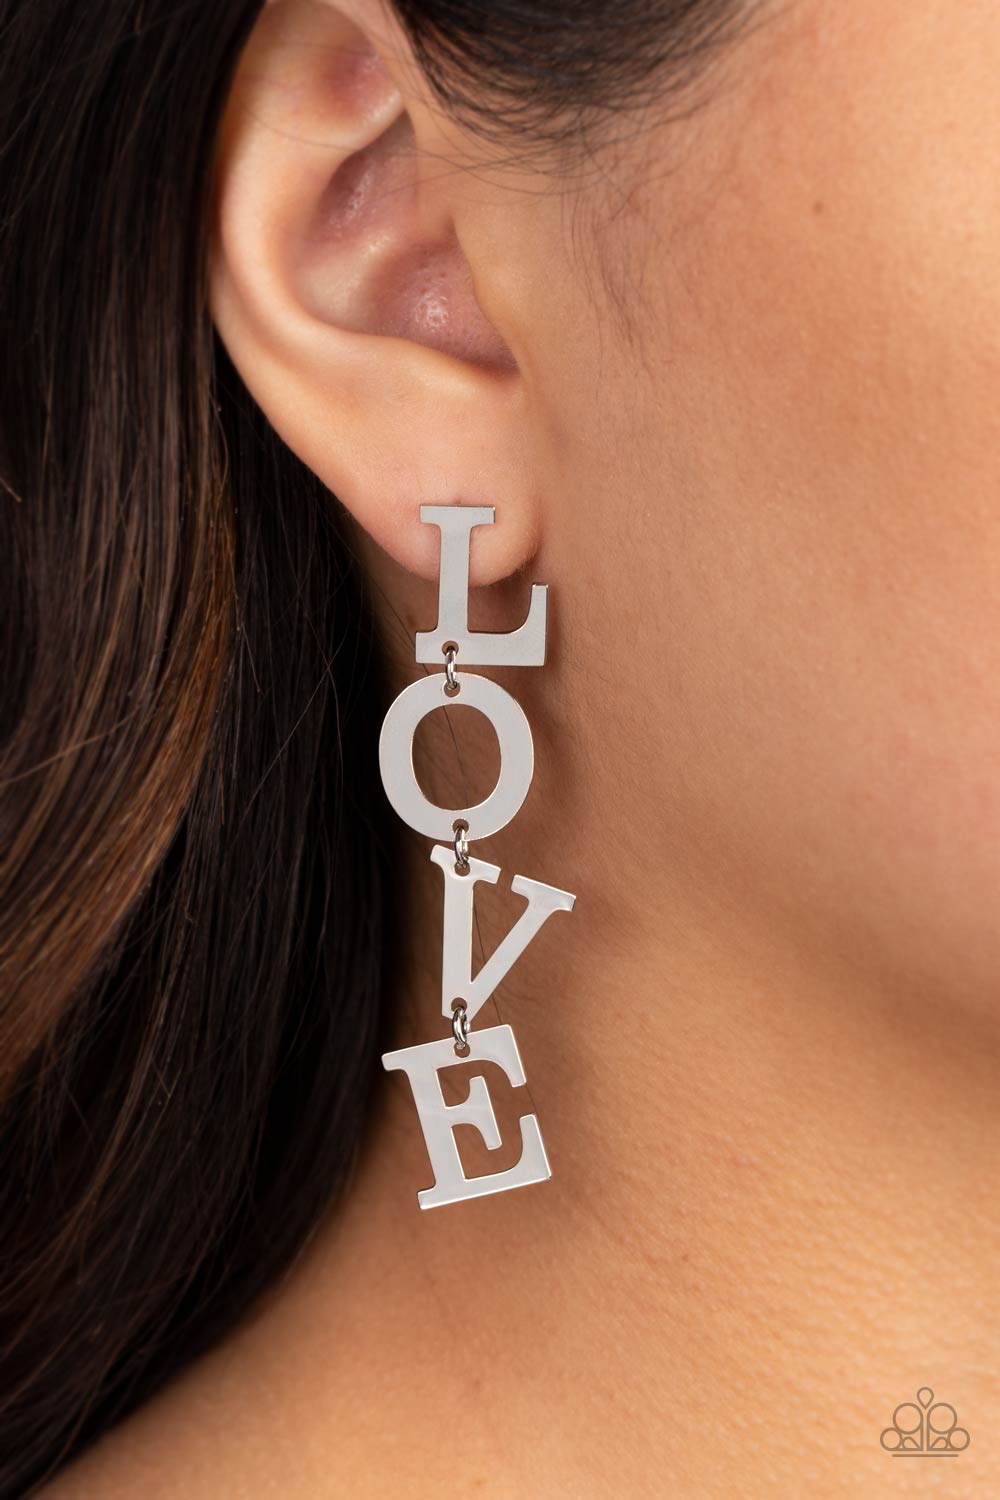 L-O-V-E Silver Earrings - Paparazzi Accessories-on model - CarasShop.com - $5 Jewelry by Cara Jewels